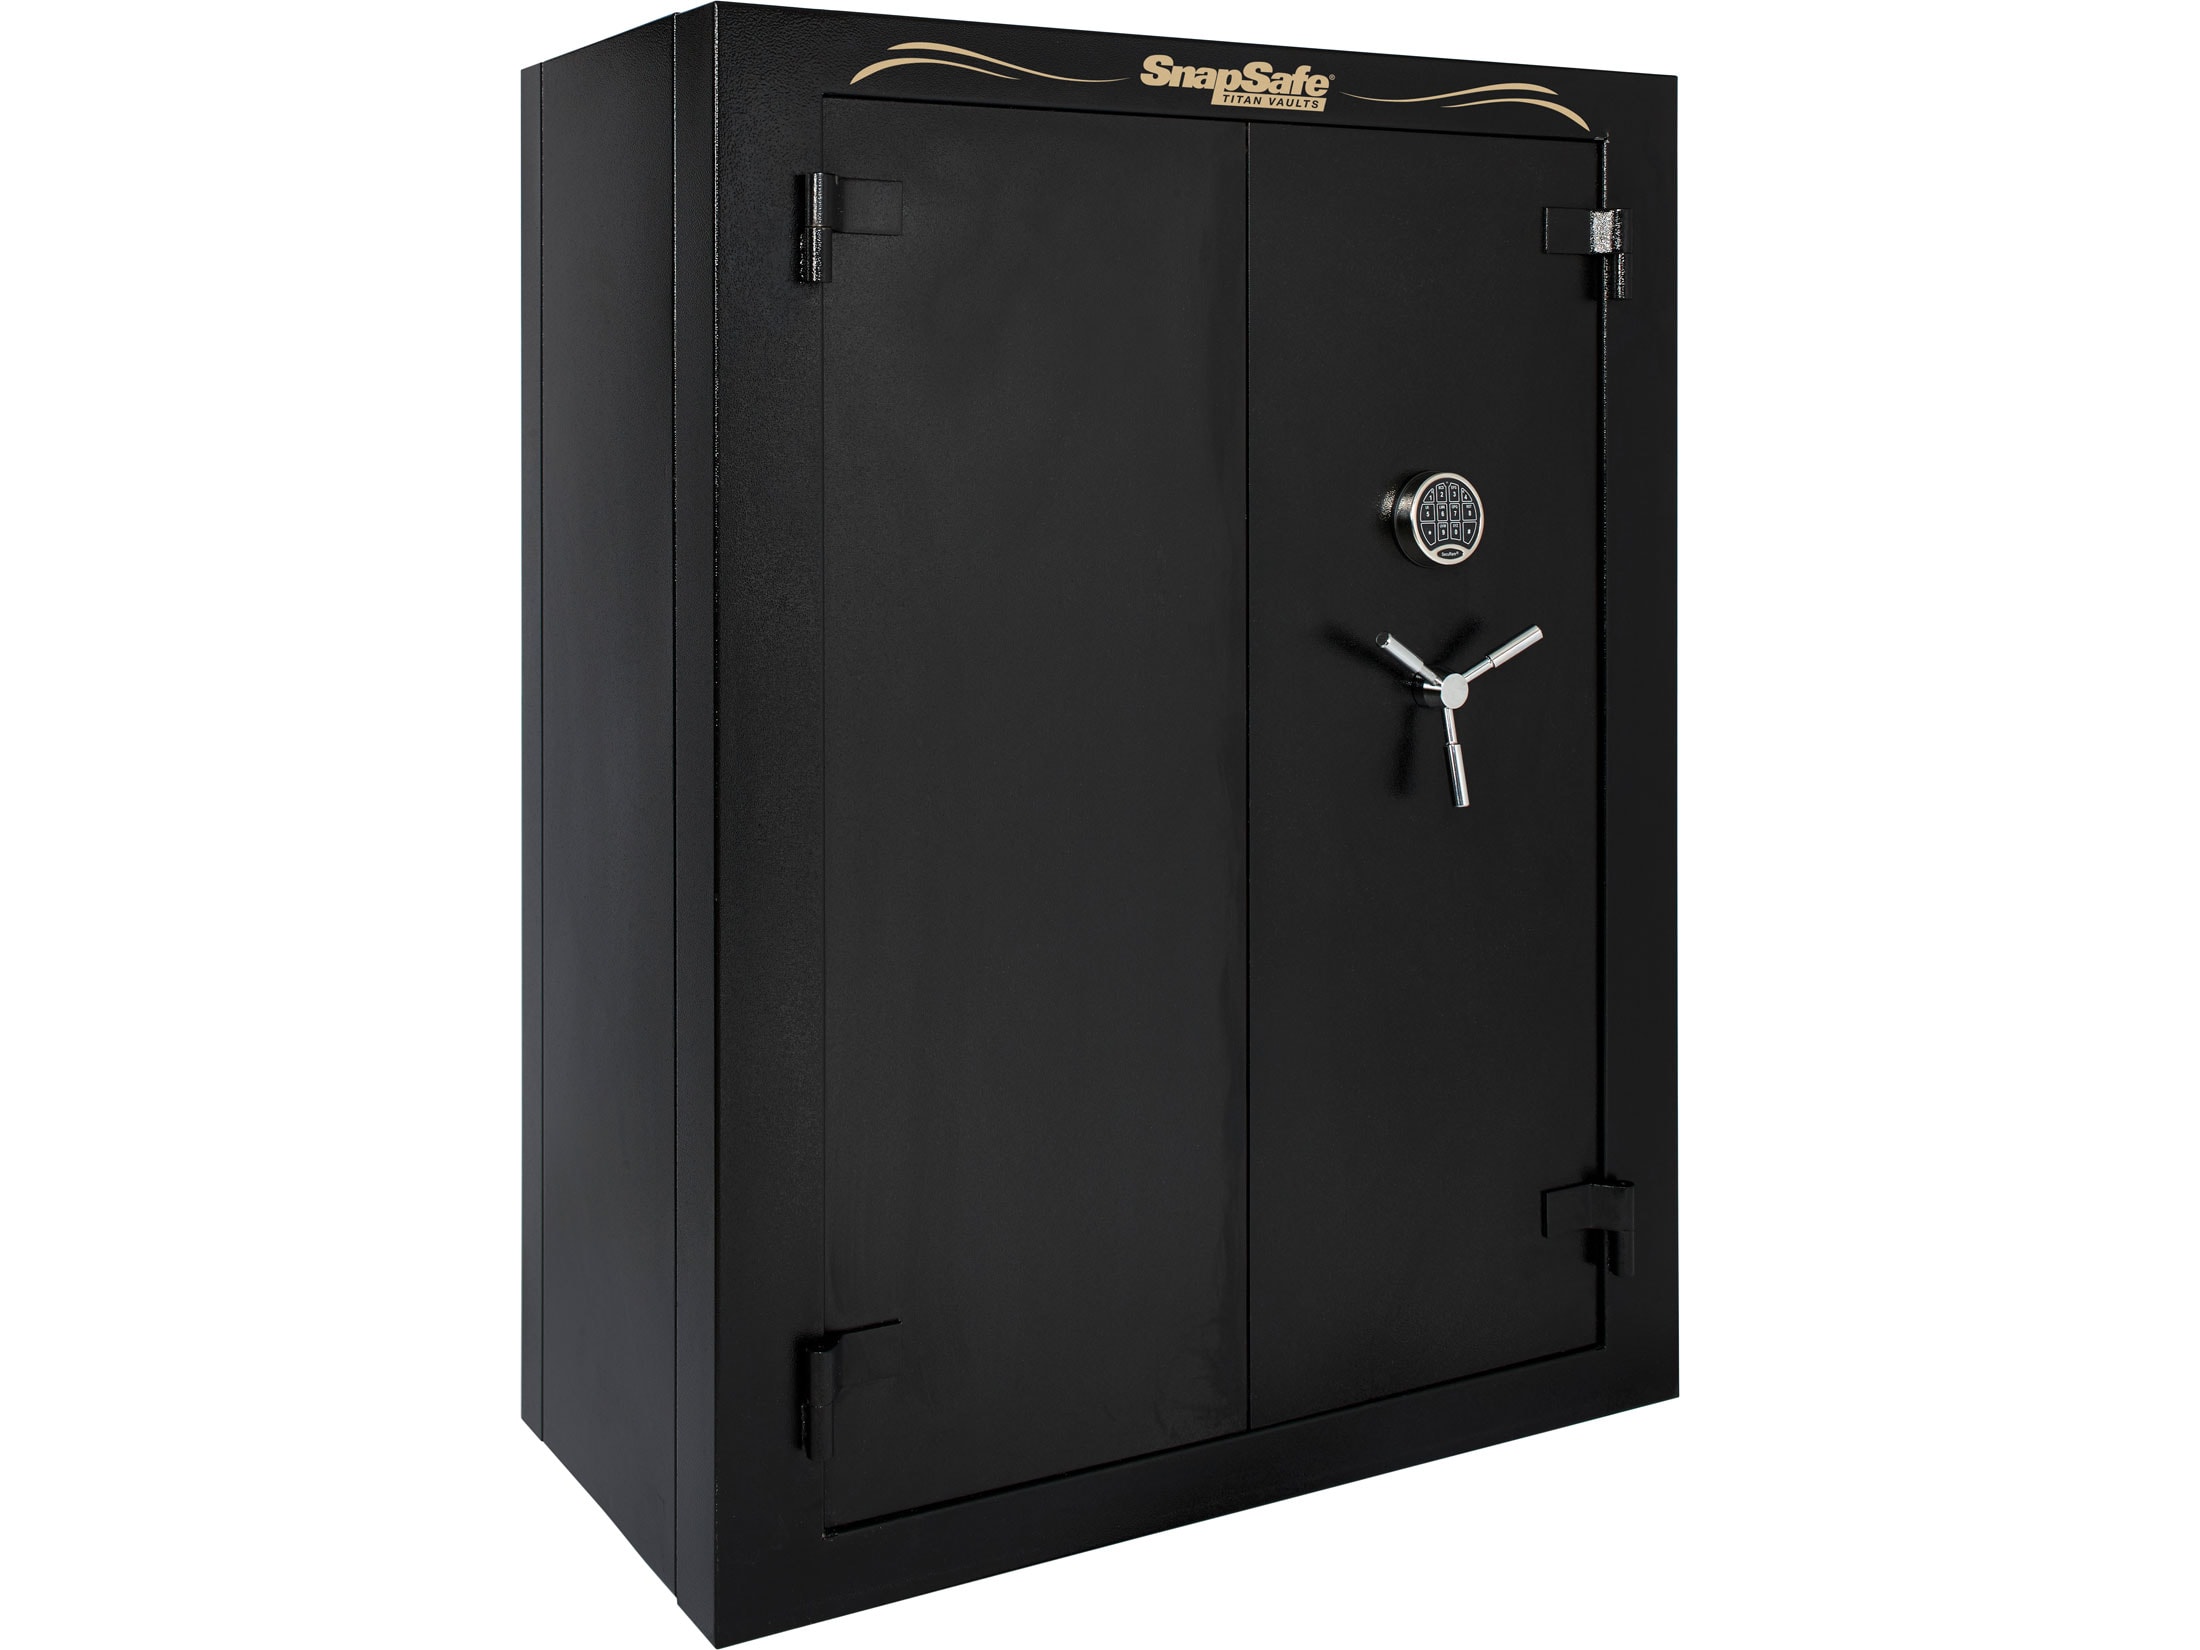 SnapSafe Super Titan XL Double Door Fire-Resistant Modular Safe with Electronic Lock Black For Sale